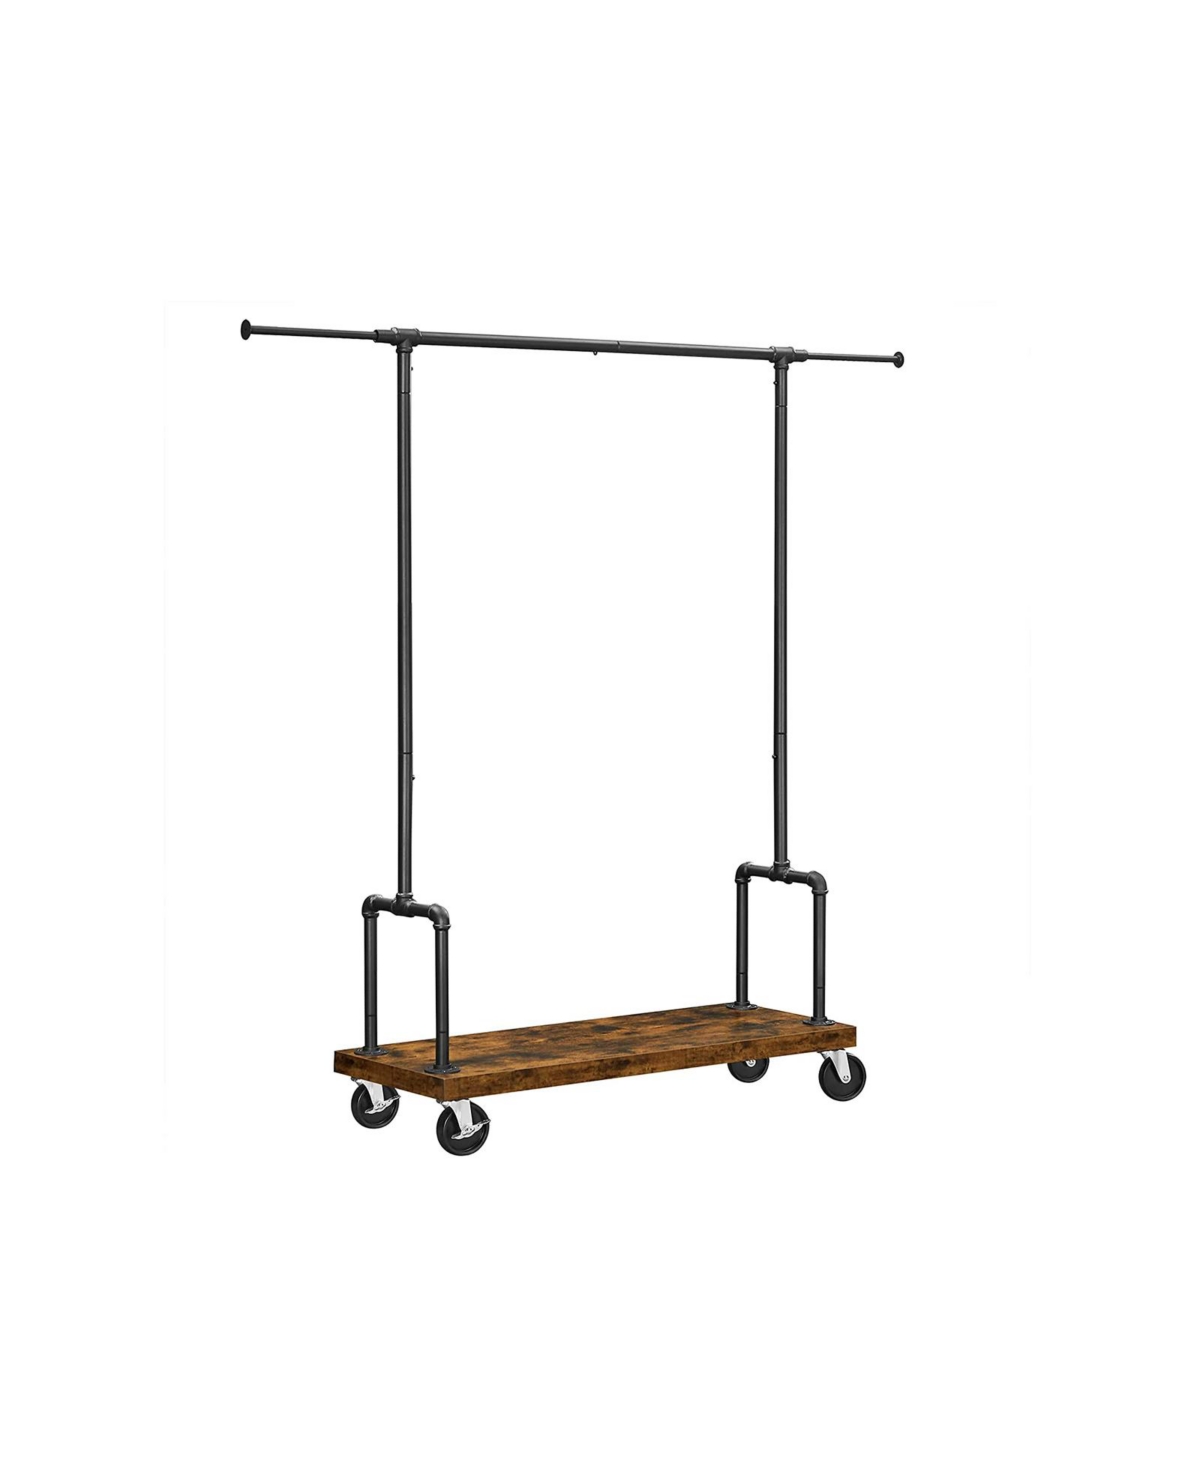 Rolling Clothes Rack, Garment Rack for Hanging Clothes with Wheels - Rustic Brown